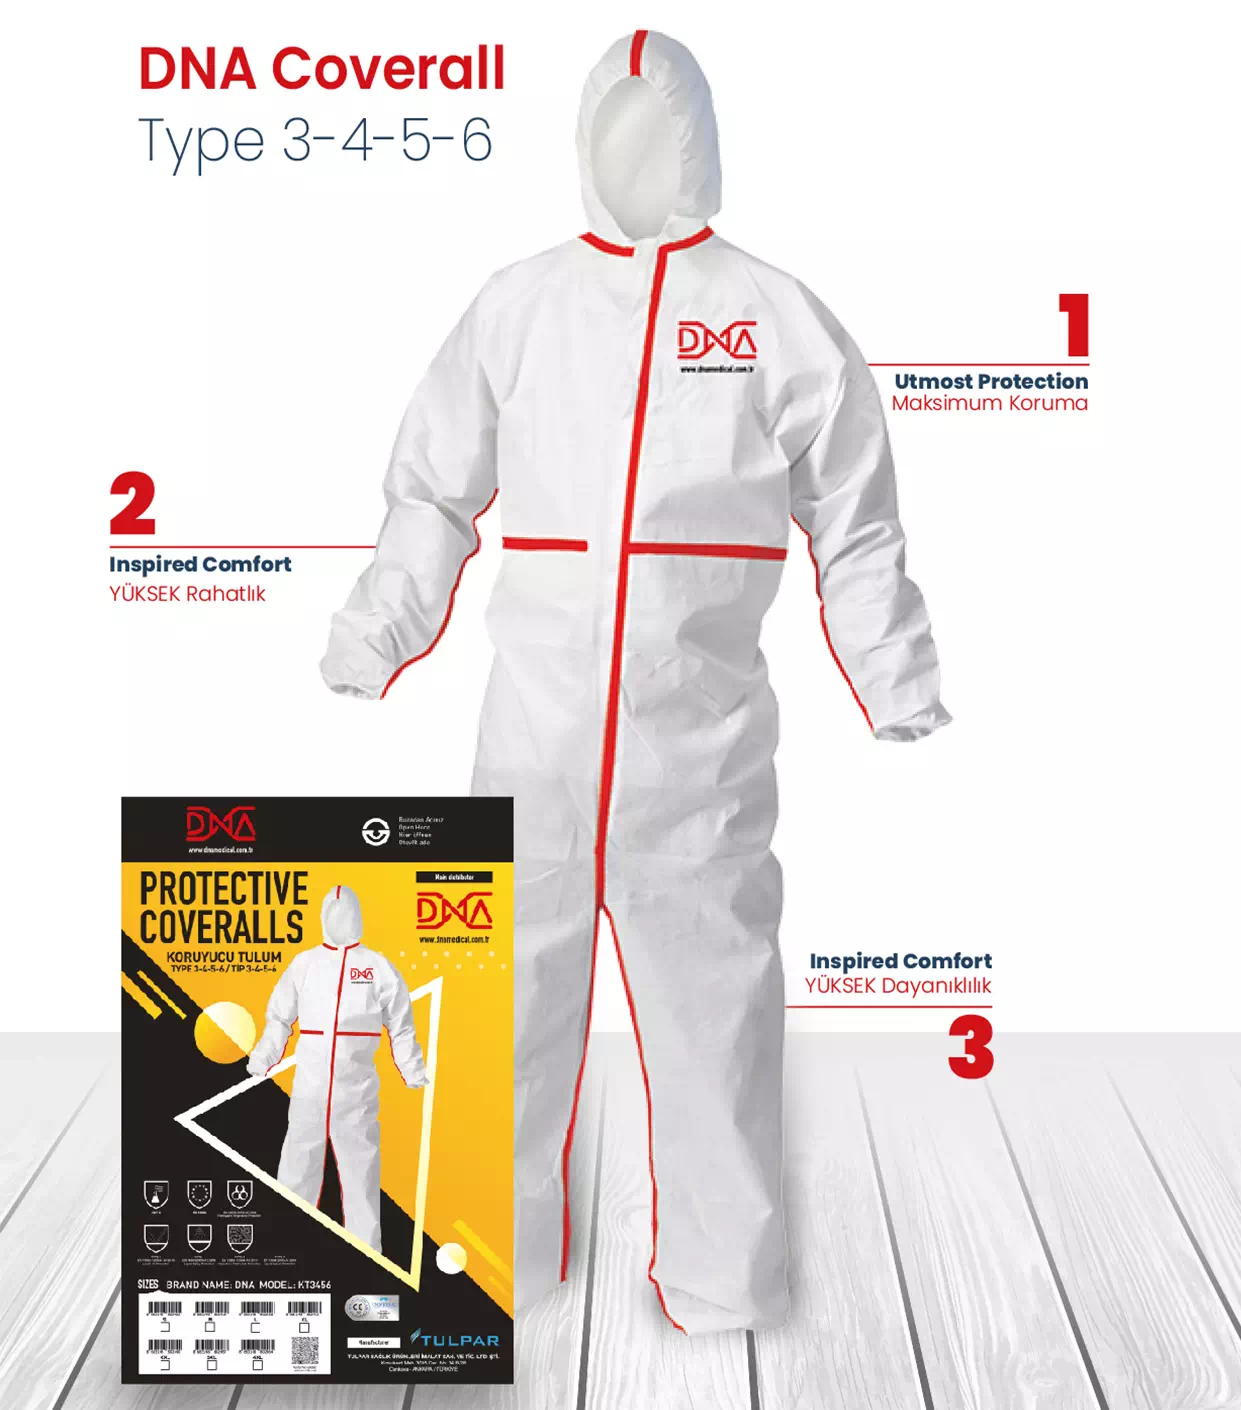 DNA – Coverall Type 3-4-5-6